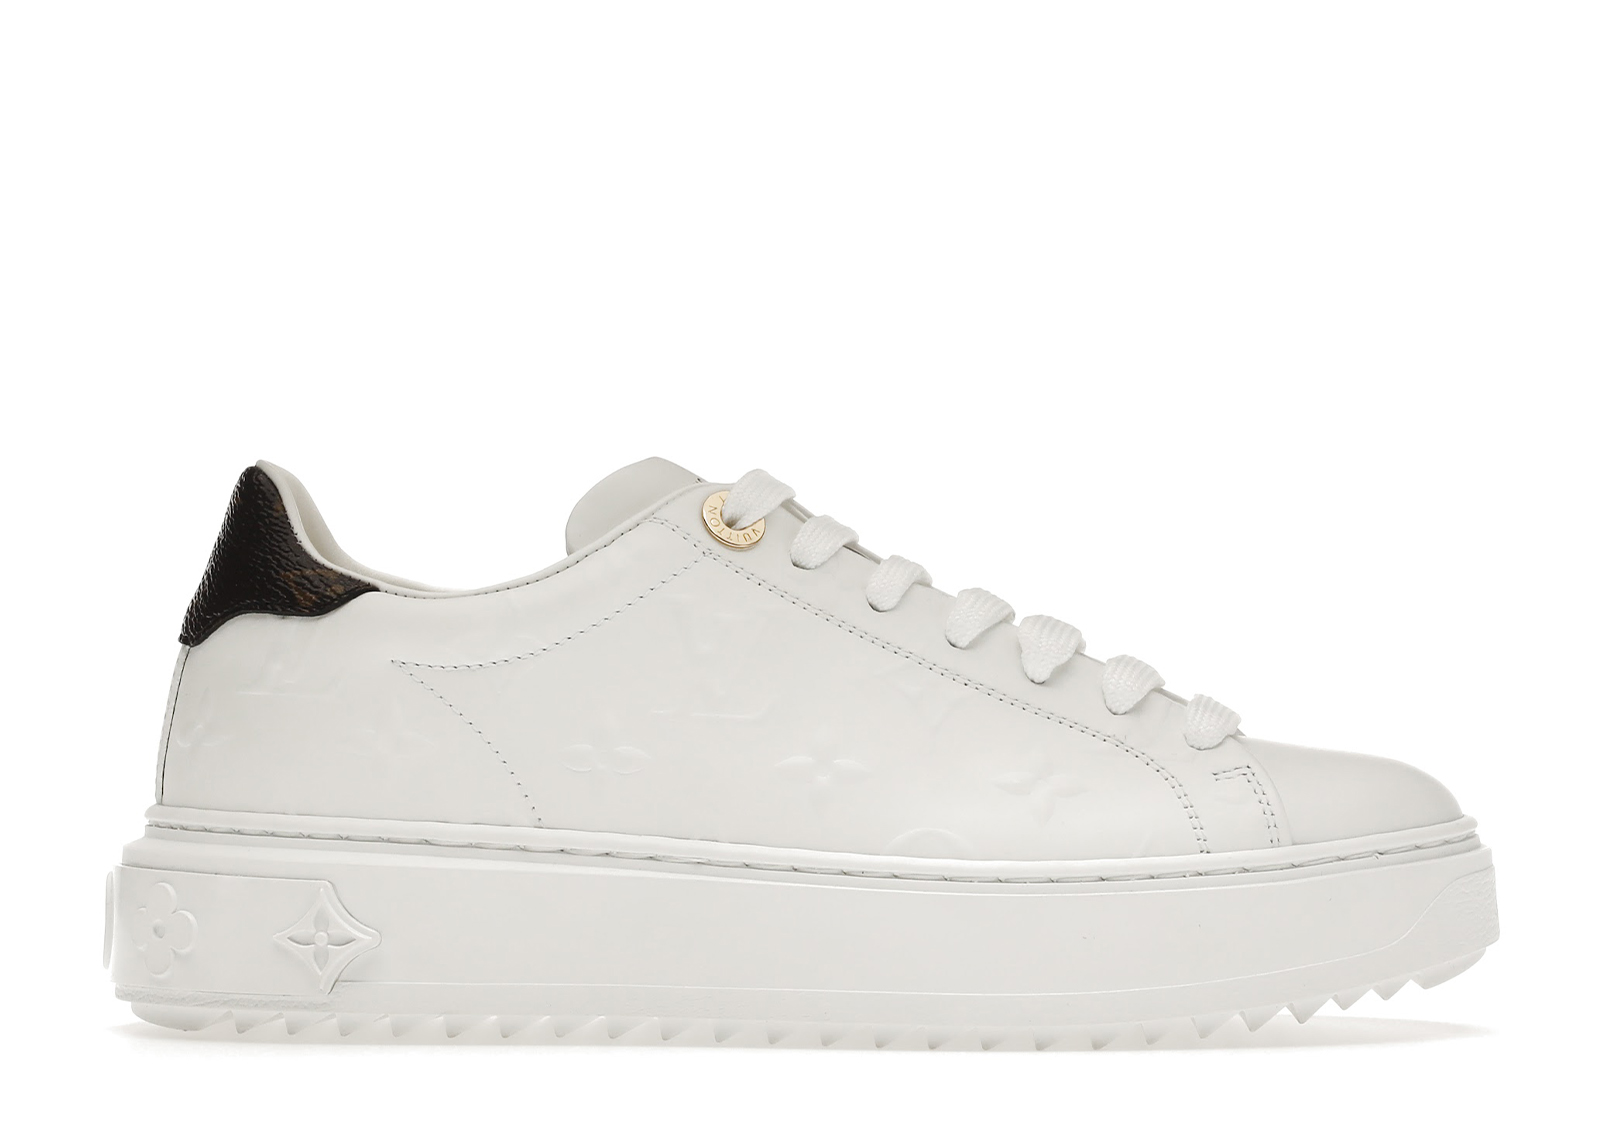 Louis Vuitton Lambskin Embossed Monogram Time Out Sneakers 38 White Used   BrandConscious Authentics